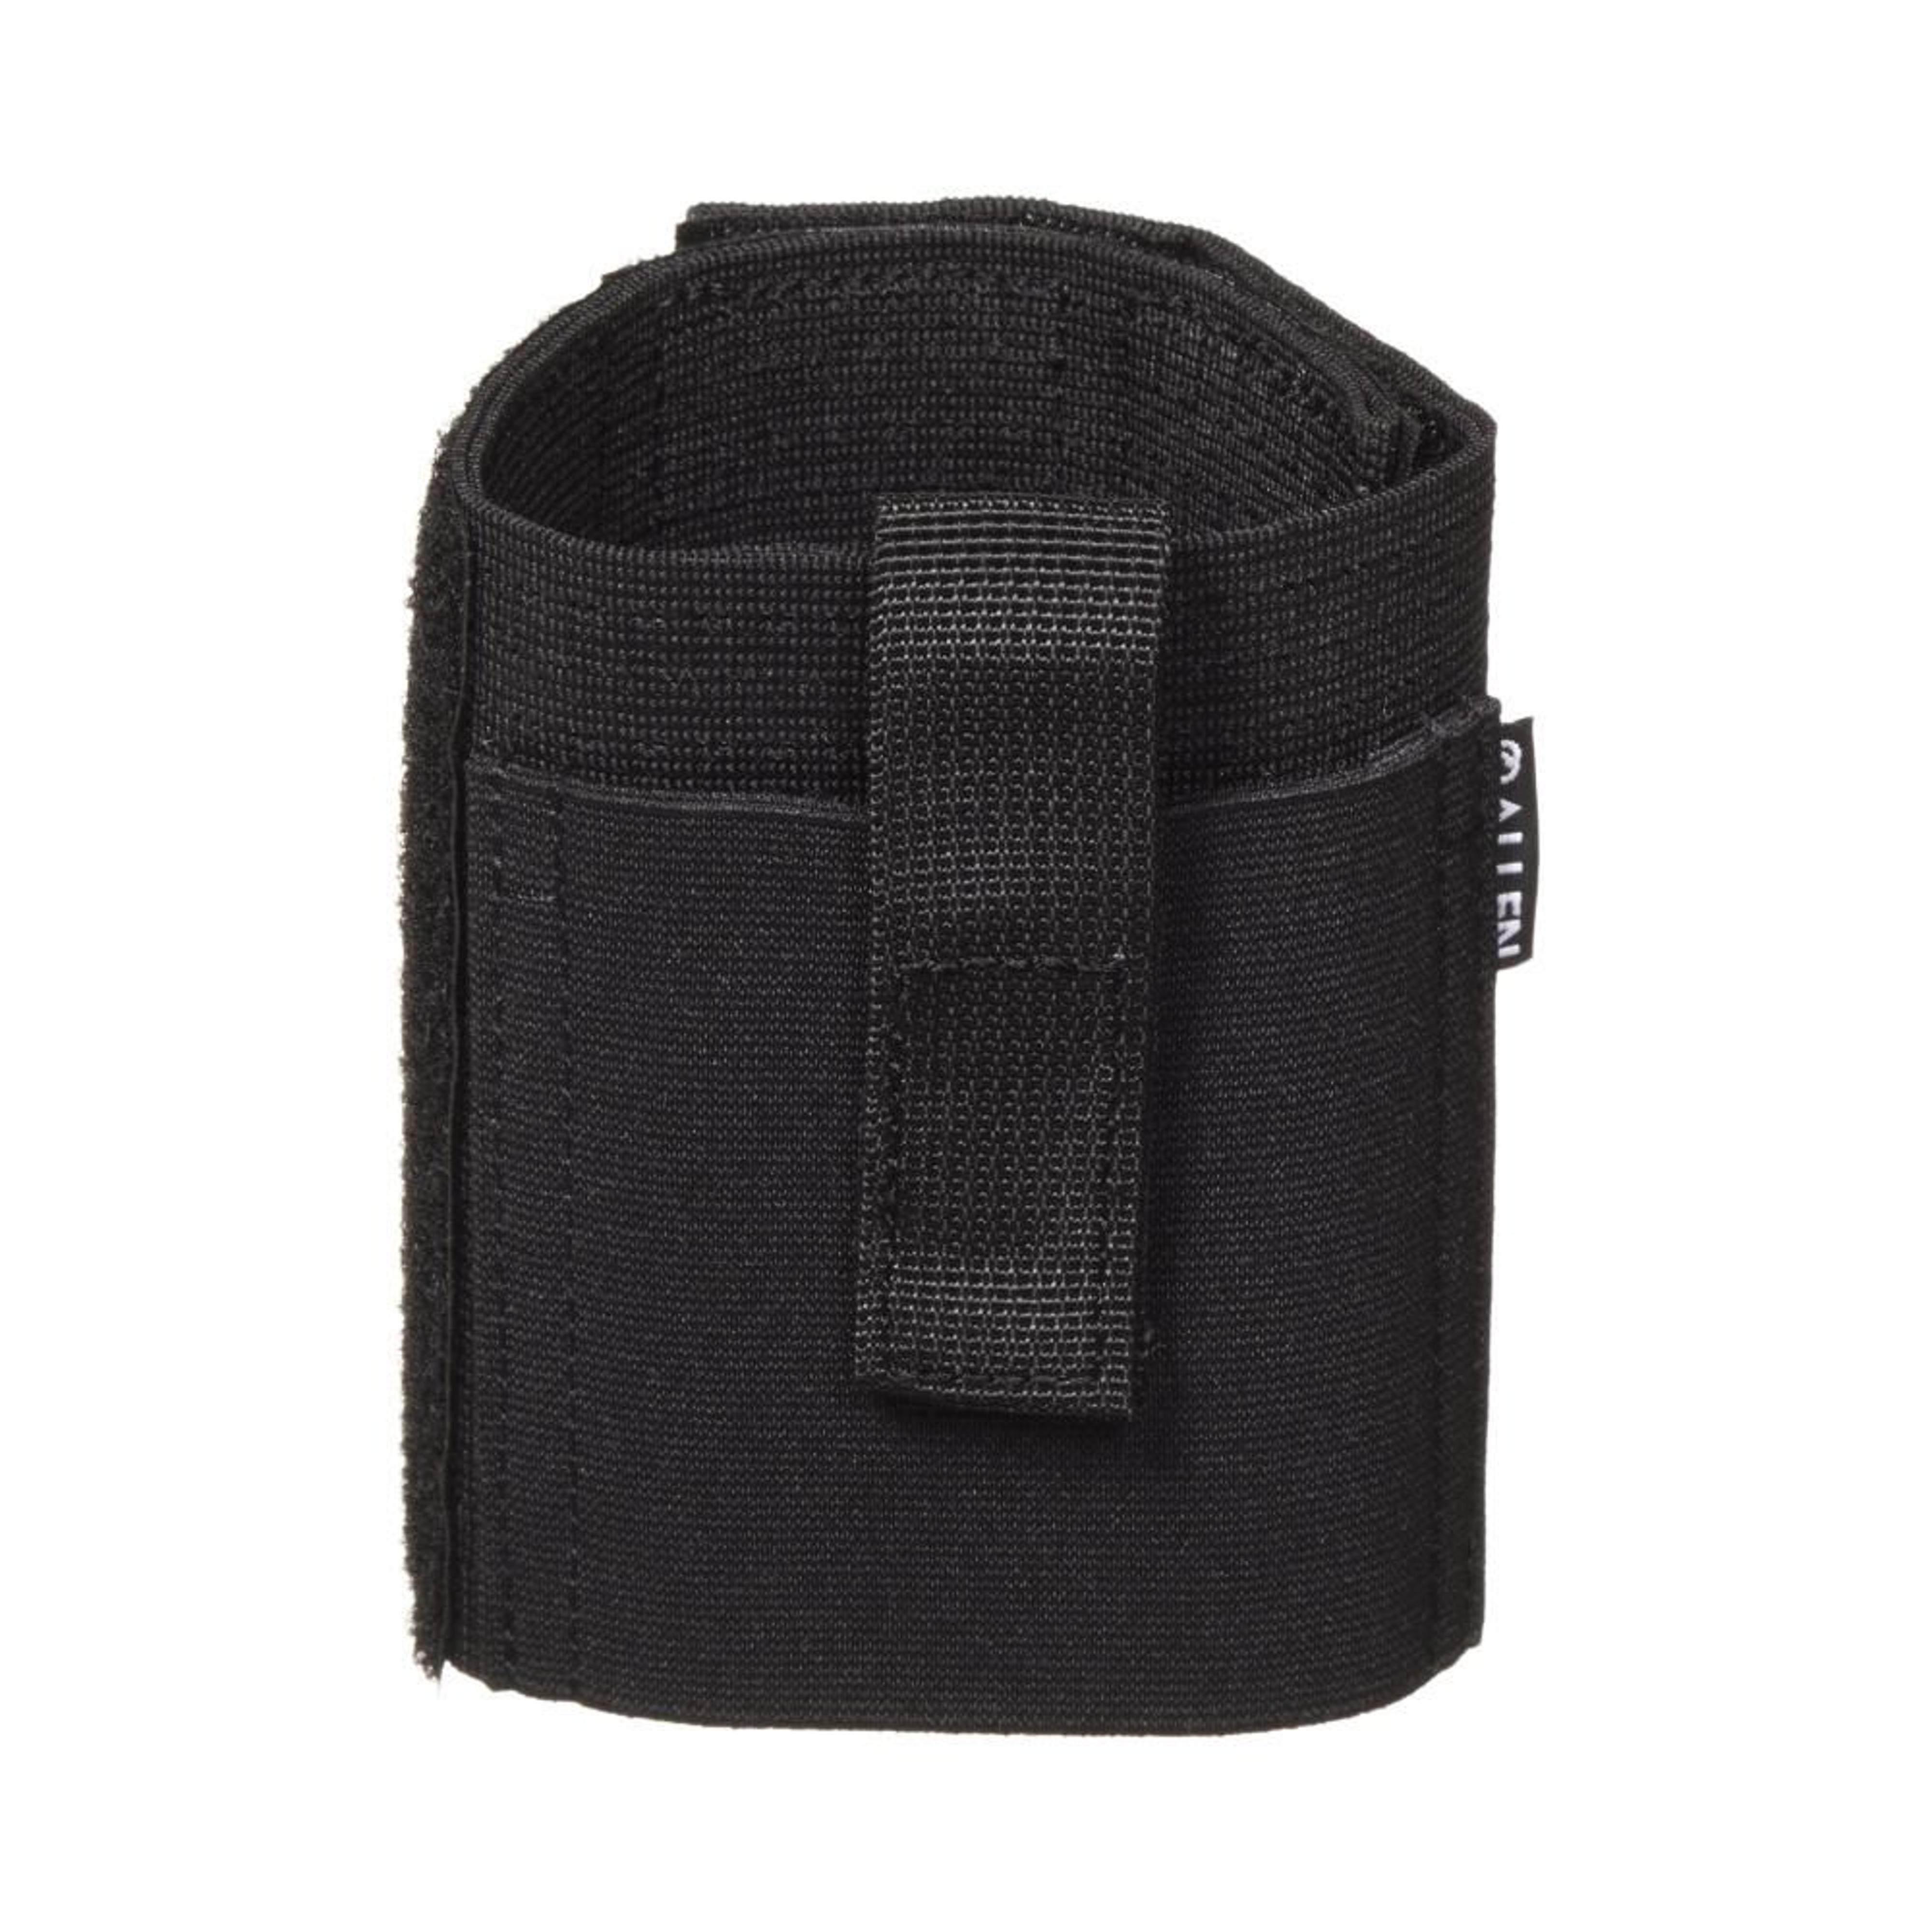  Hideout Ankle Holster